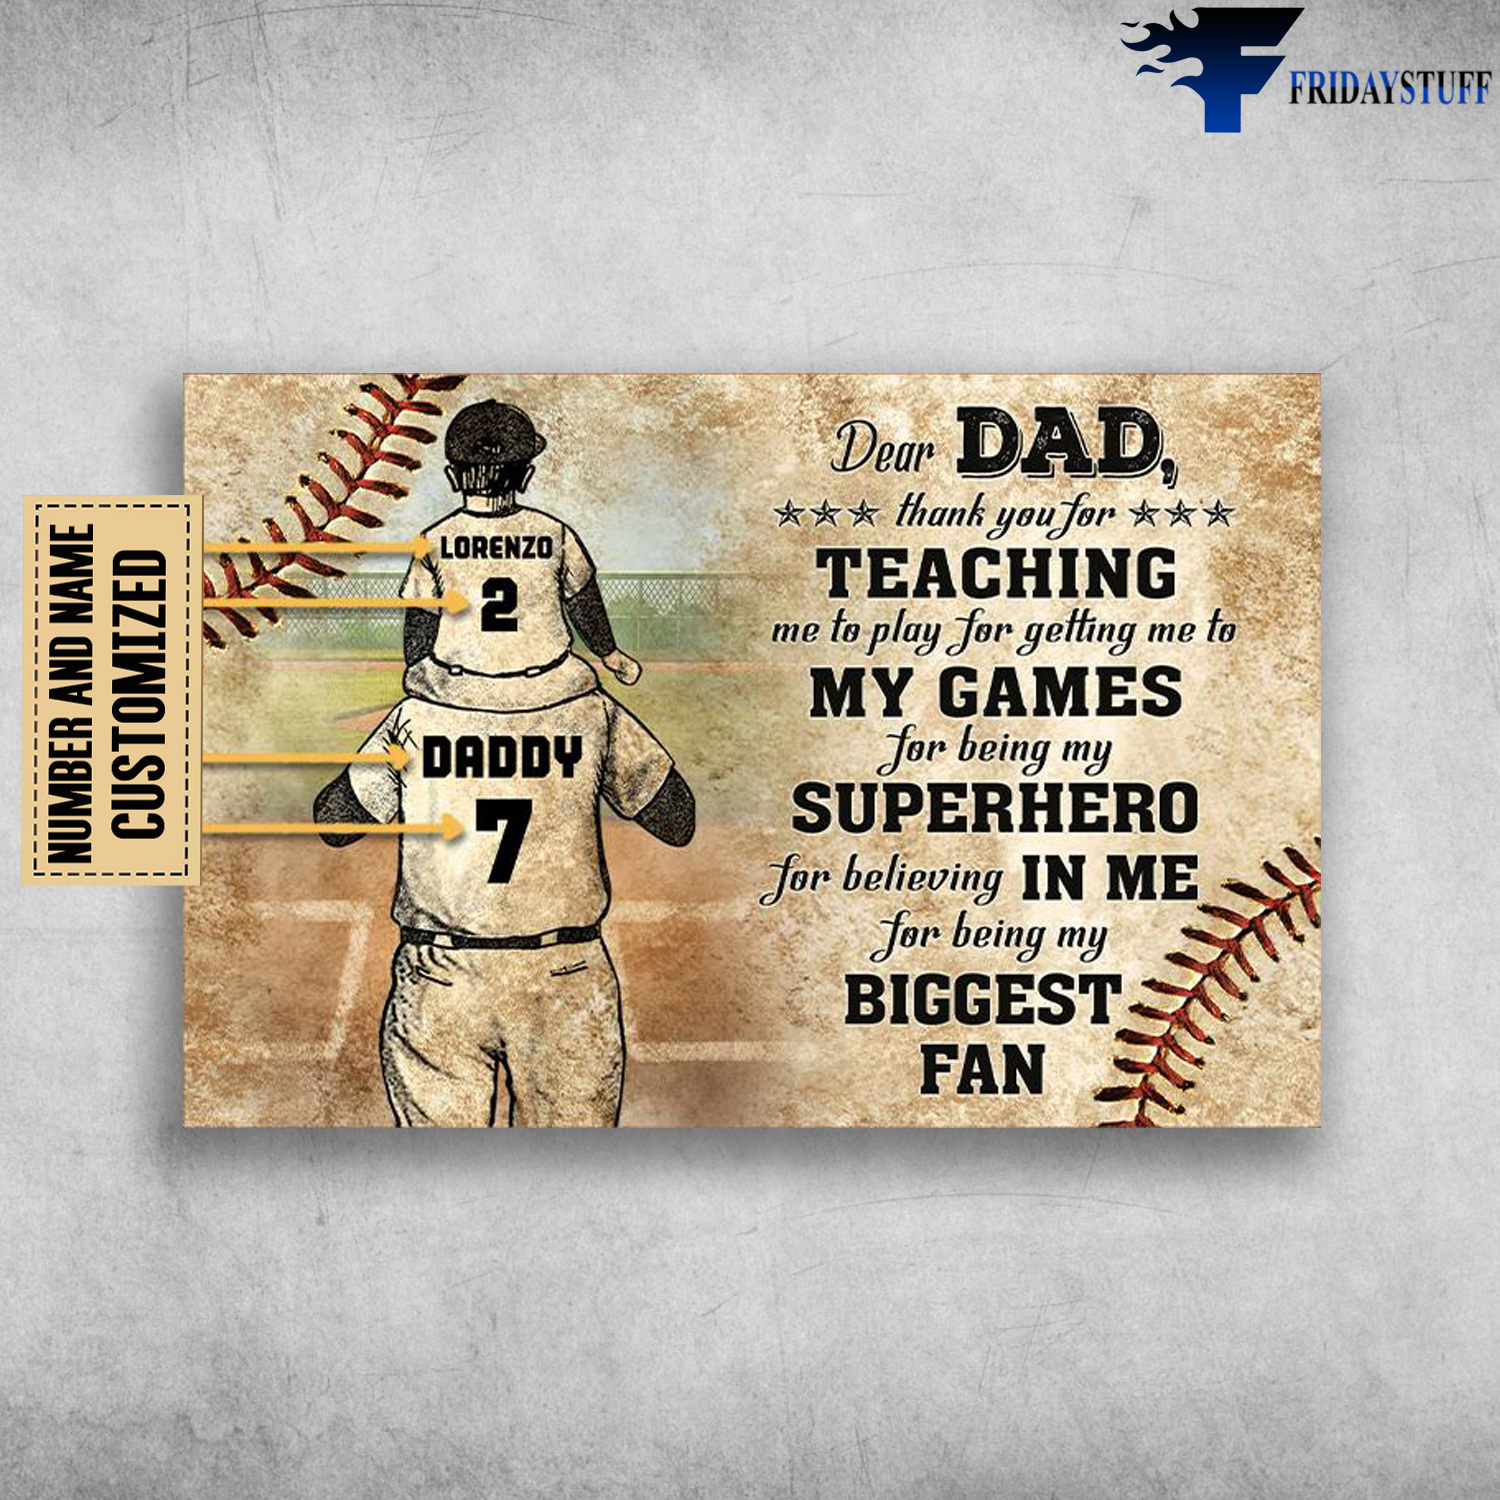 Baseball, Dad And Son, Dear Dad, Thank You For Teaching Me, To Play For Getting Me To My Games, For Being My Superhero For Believing In Me, For Biggest Fan